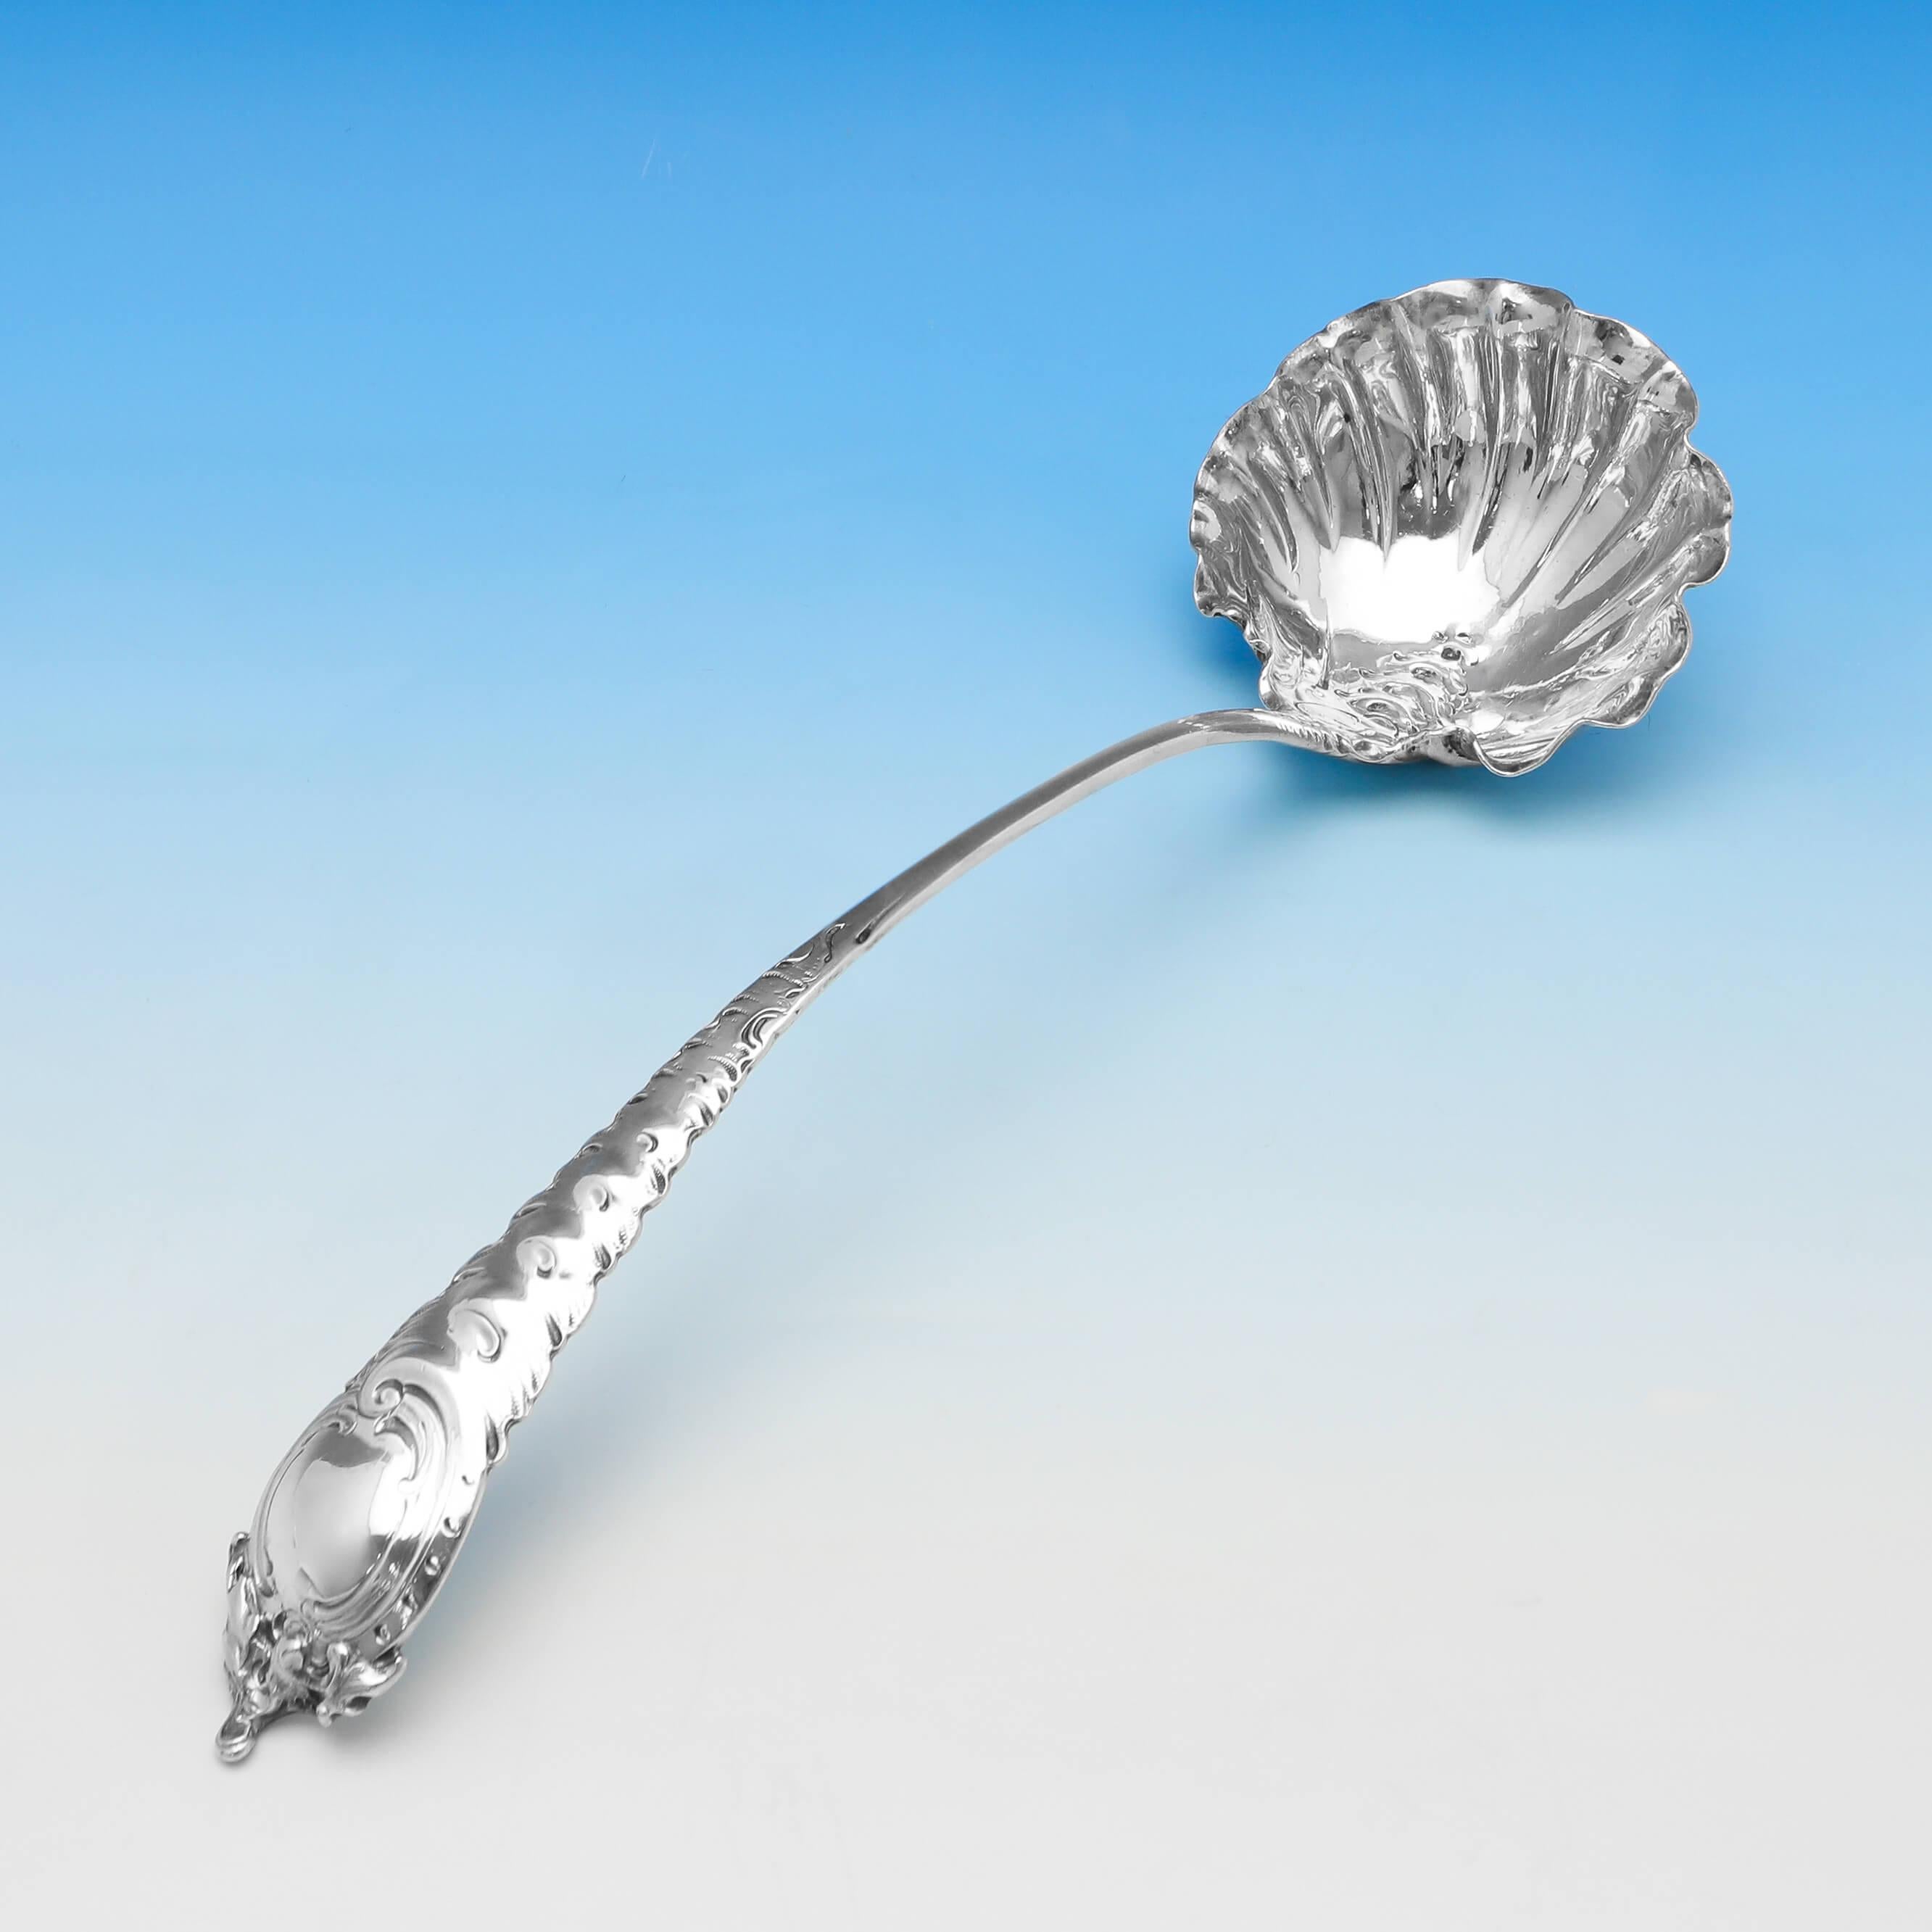 Hallmarked in London in 1756 by Ebeneezer Coker, this striking, George II, antique sterling silver punch ladle, is in the Rococo taste. With an ornate handle and shaped bowl. The punch ladle measures 13